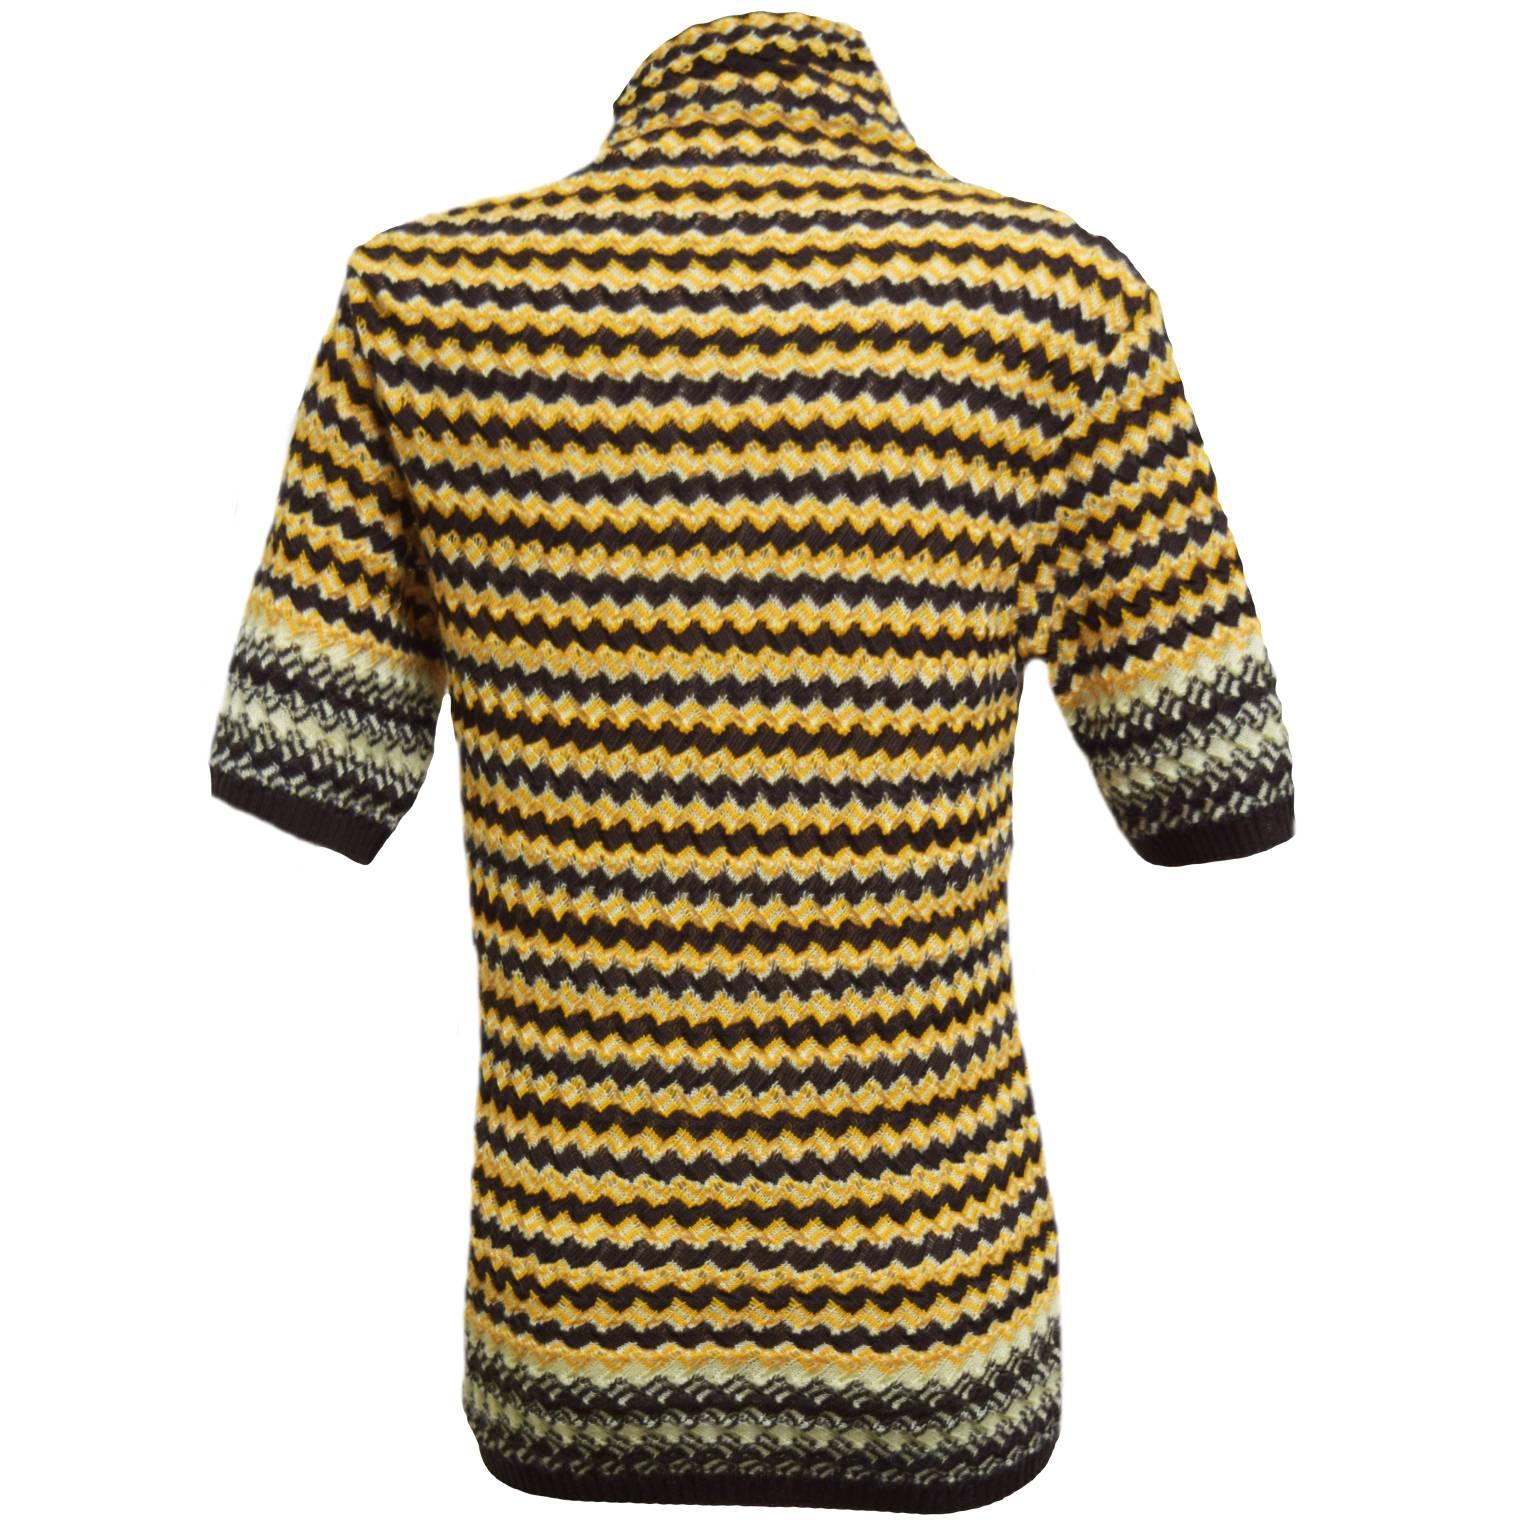 This Missoni knit blouse is the exact image of the brand. Made out of 100% cotton this top is a brown, cream, and mustard chevron print taking the look back to the 70's type of aesthetics. High neckline and short sleeved.